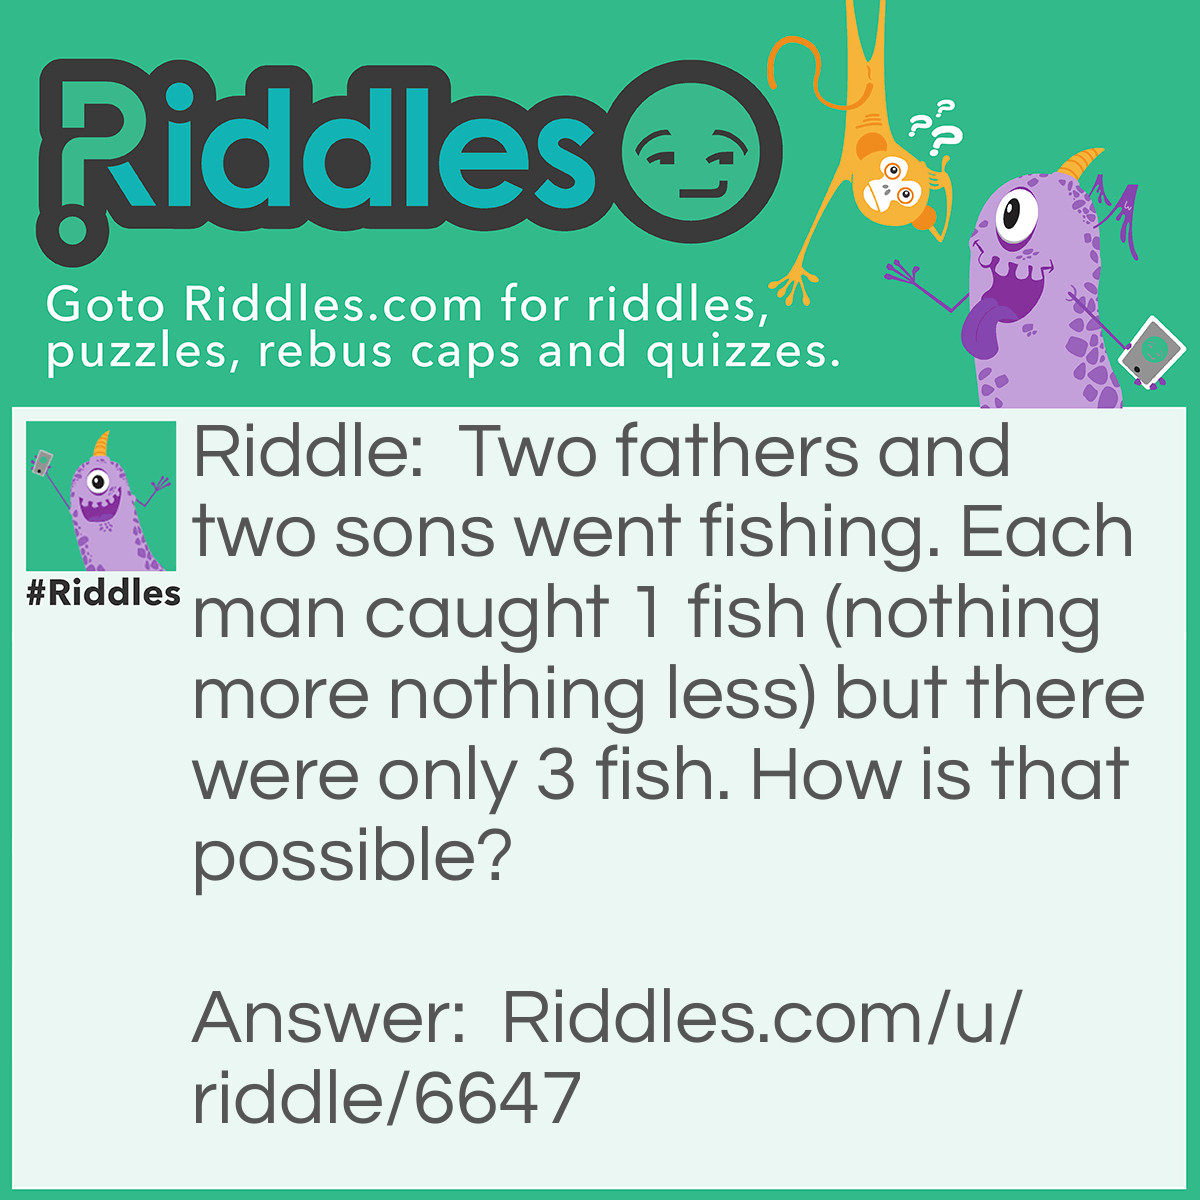 Riddle: Two fathers and two sons went fishing. Each man caught 1 fish (nothing more nothing less) but there were only 3 fish. How is that possible? Answer: There were father, son and grandpa who is a father at the same time.. so it was two fathers and two sons.